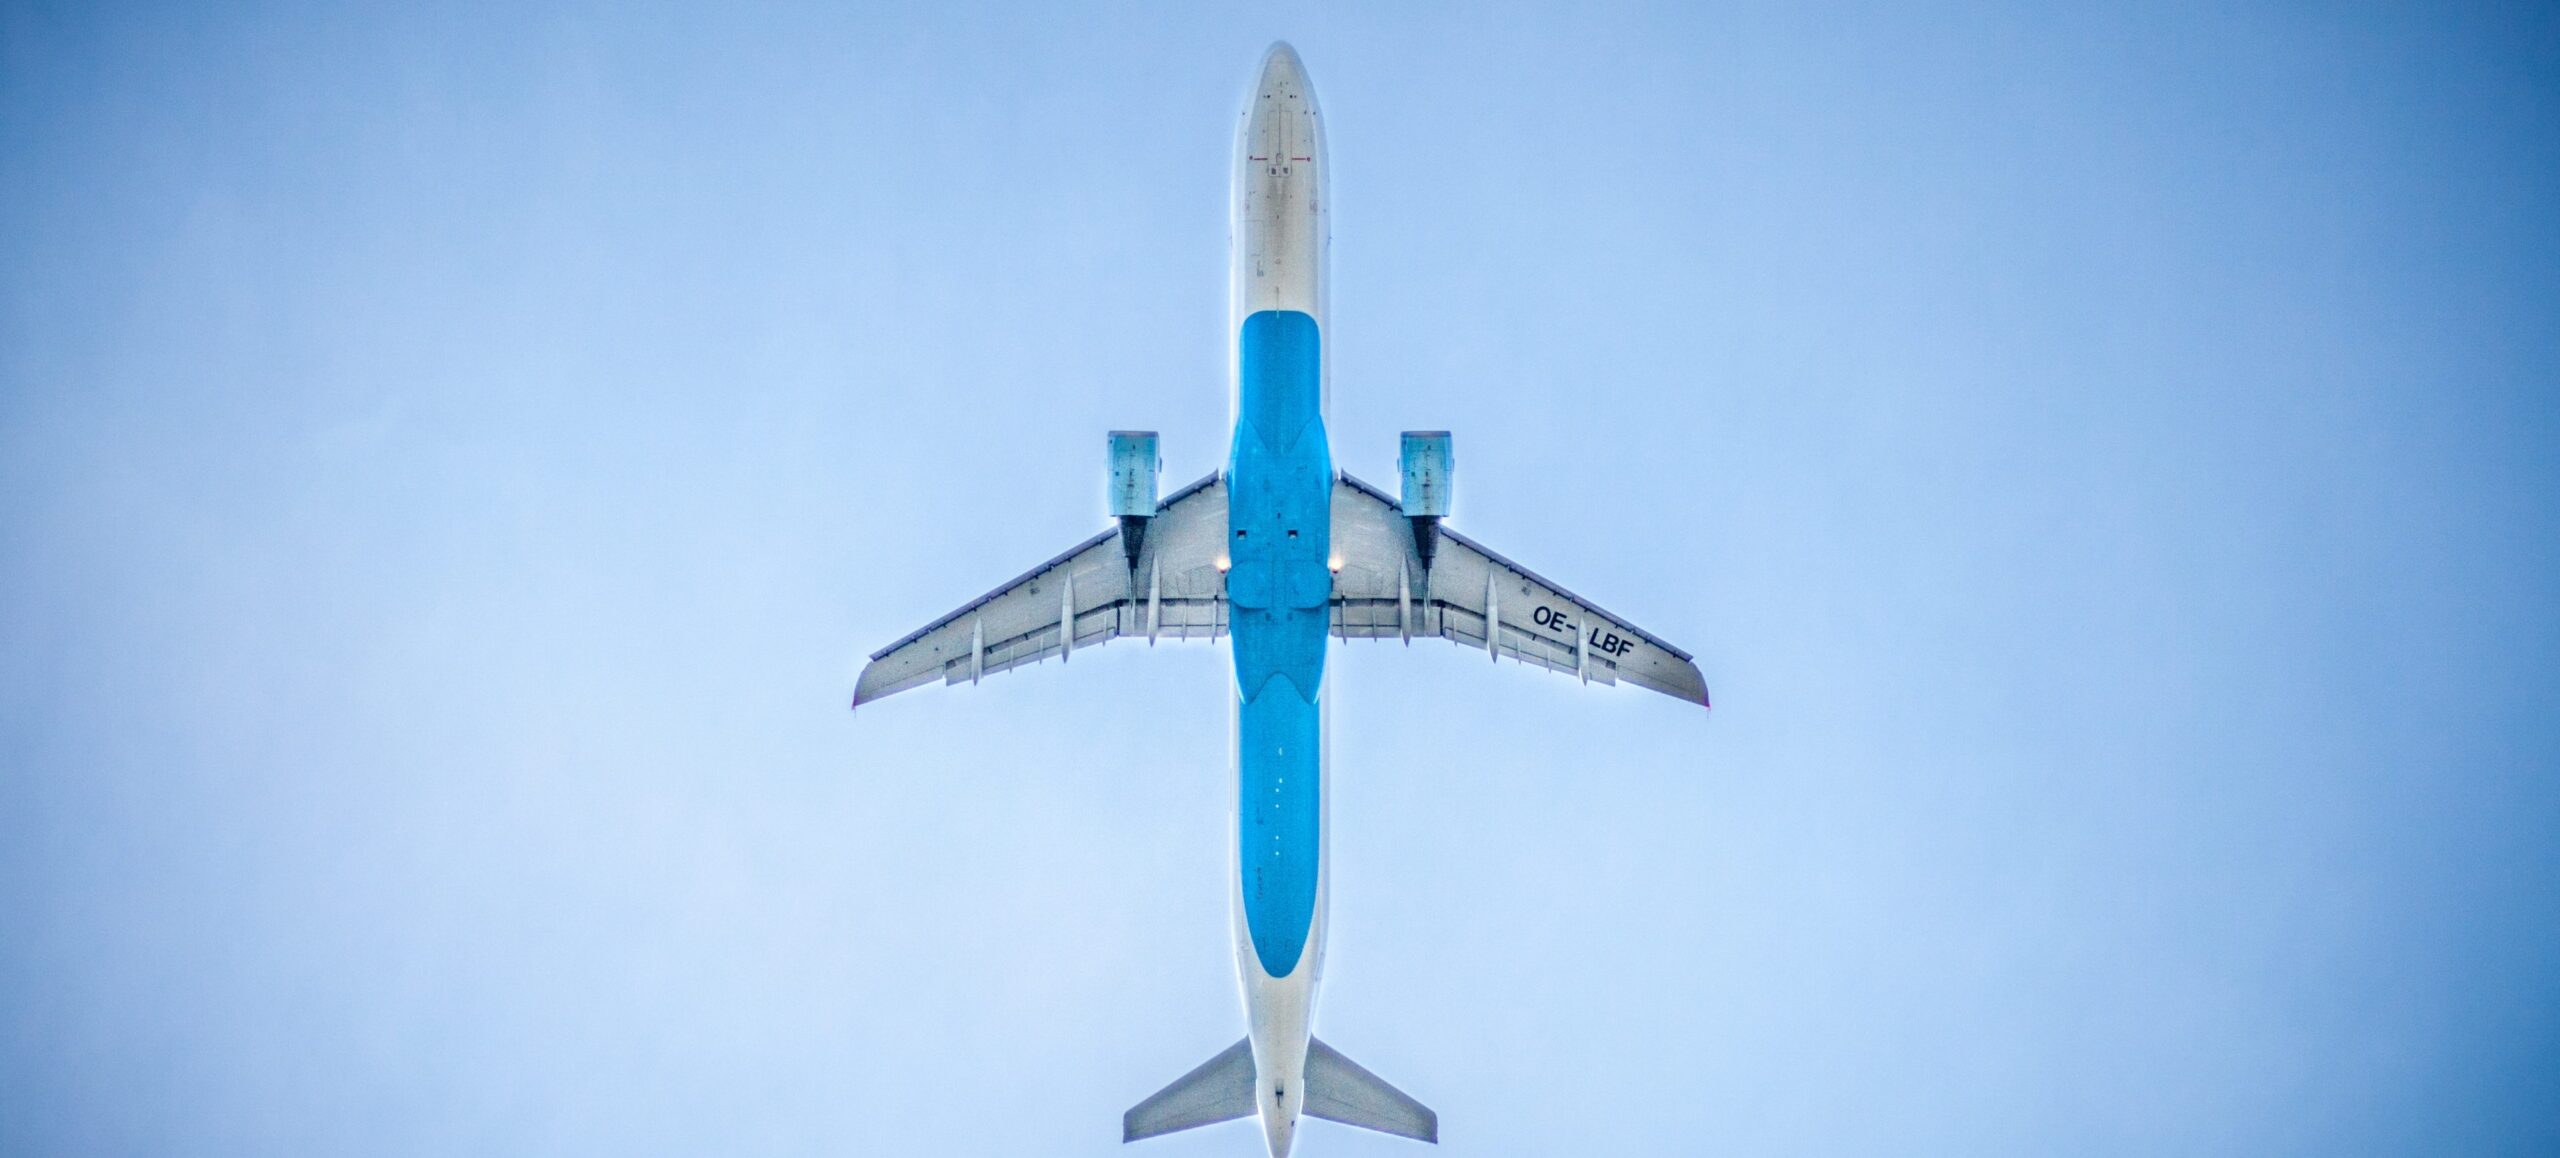 An airplane from below. Airlines continue to require Covid testing